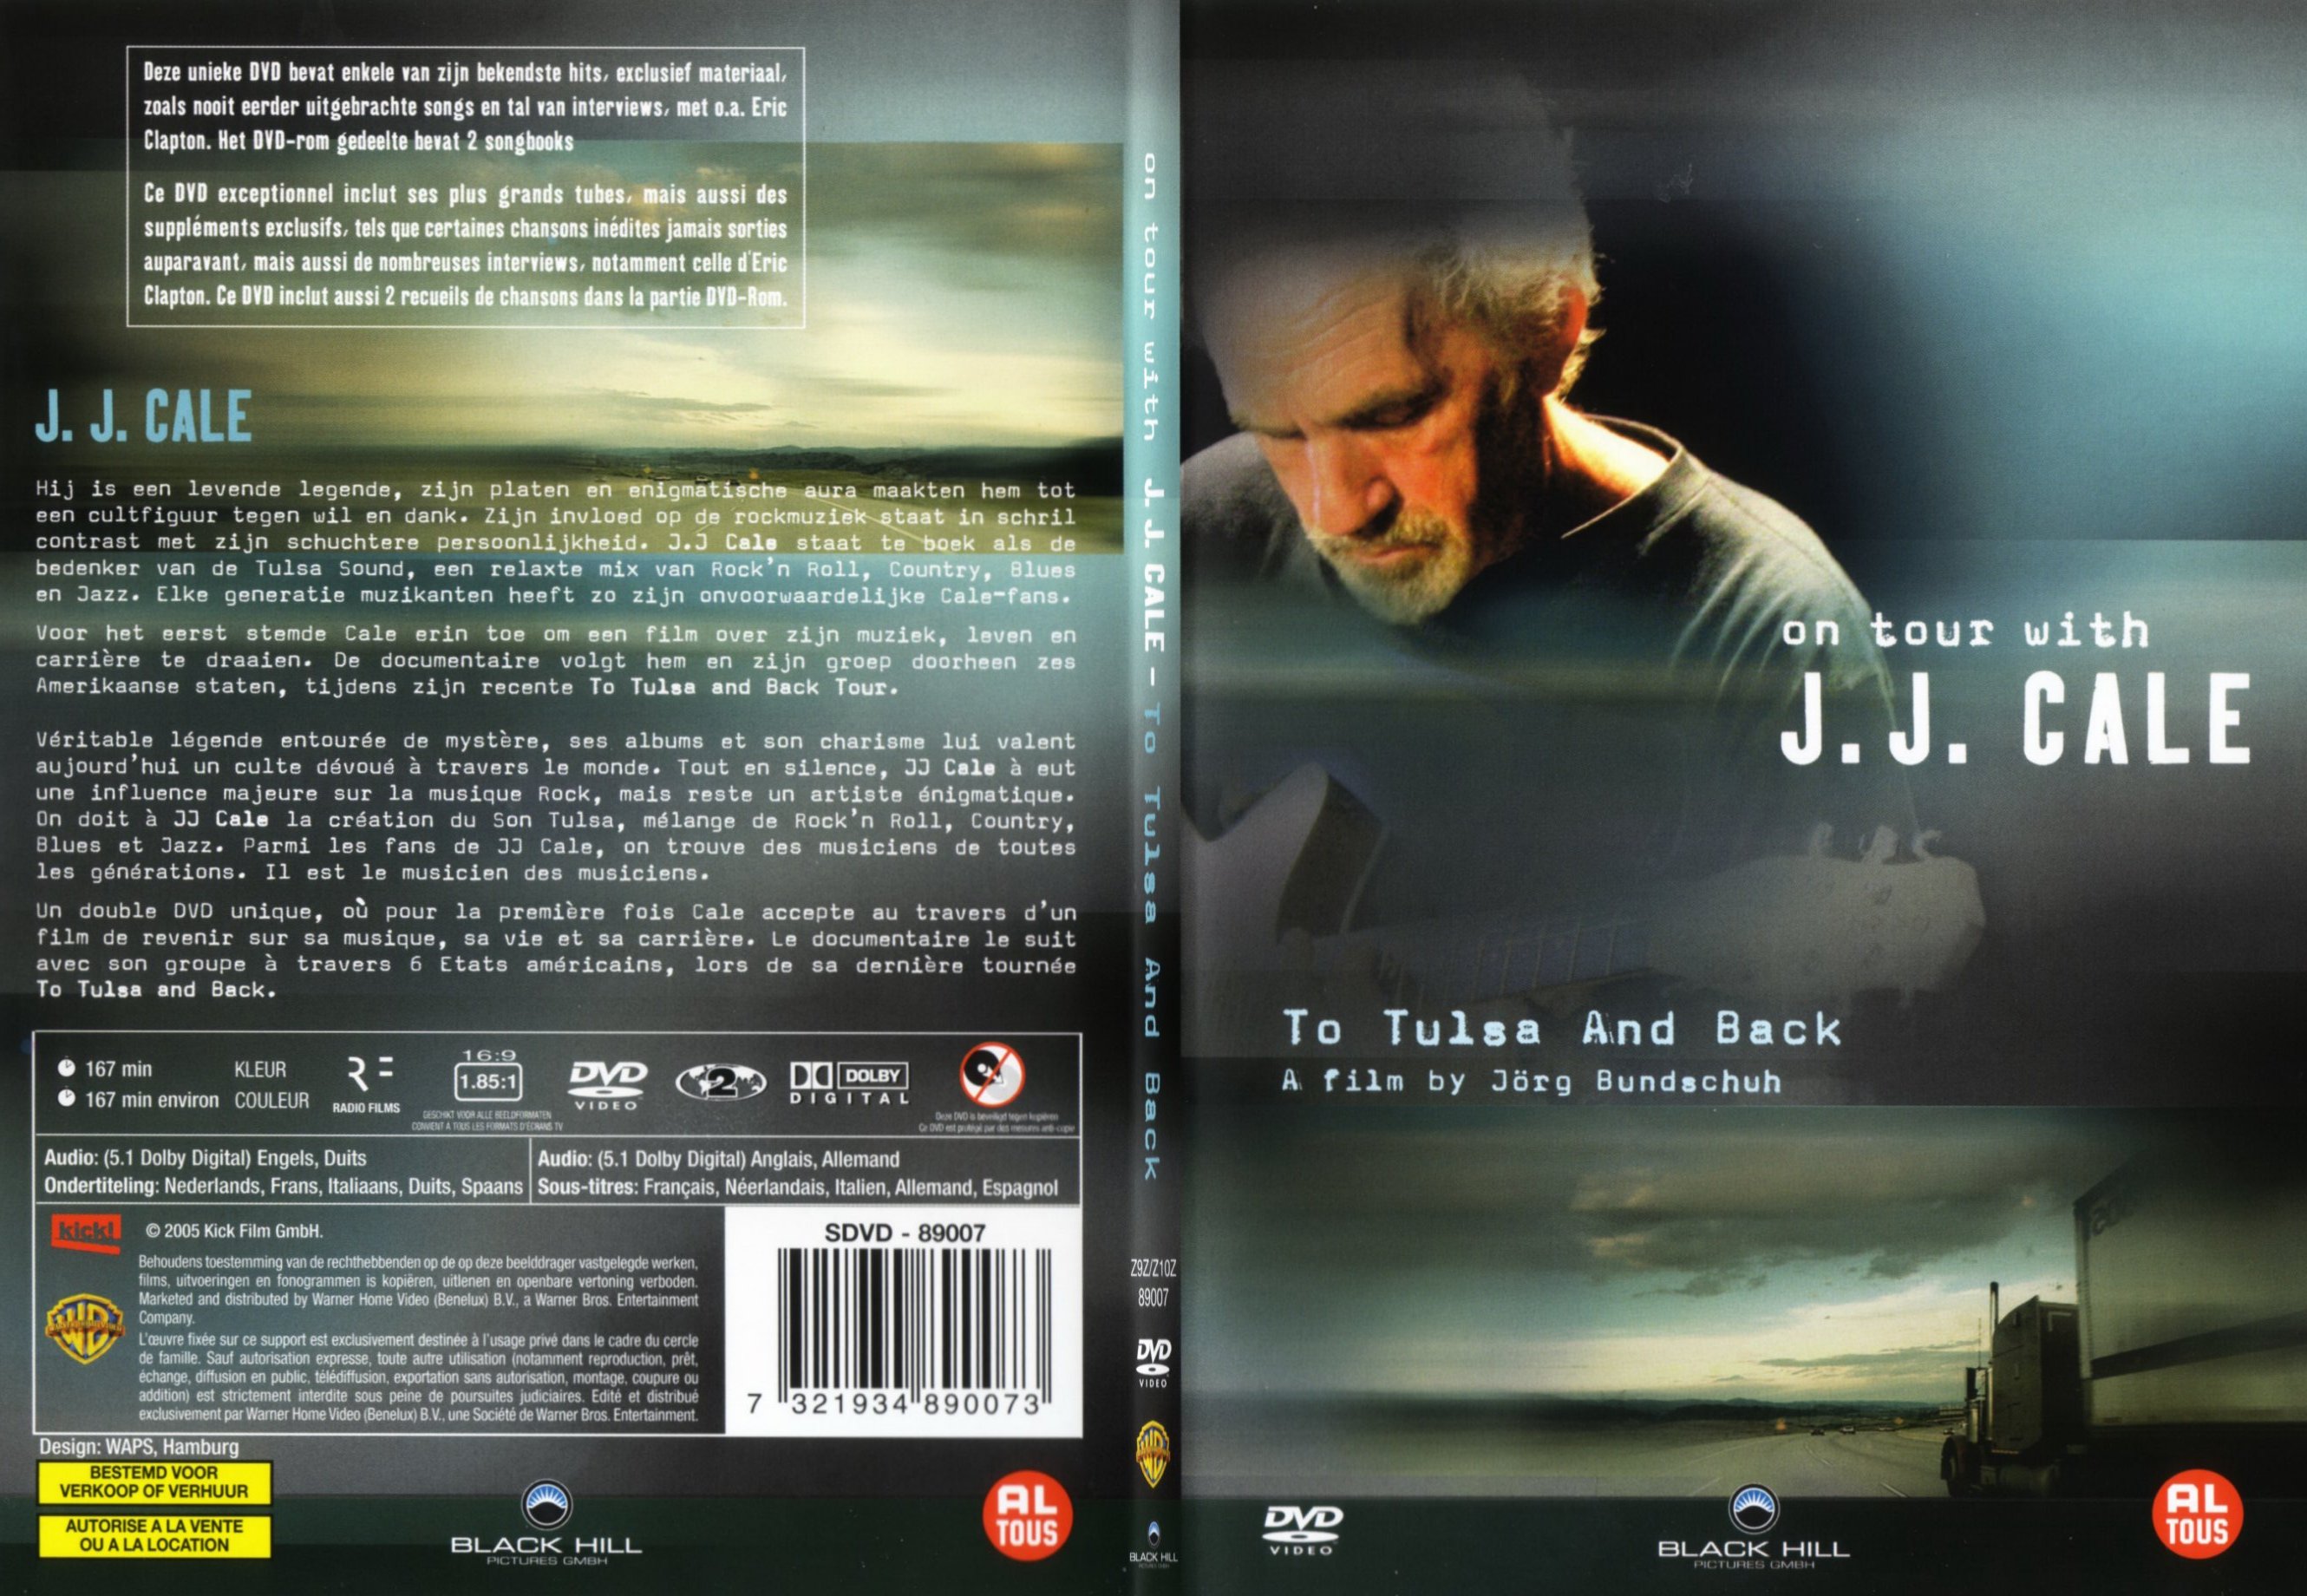 Jaquette DVD JJ Cale On tour with - SLIM